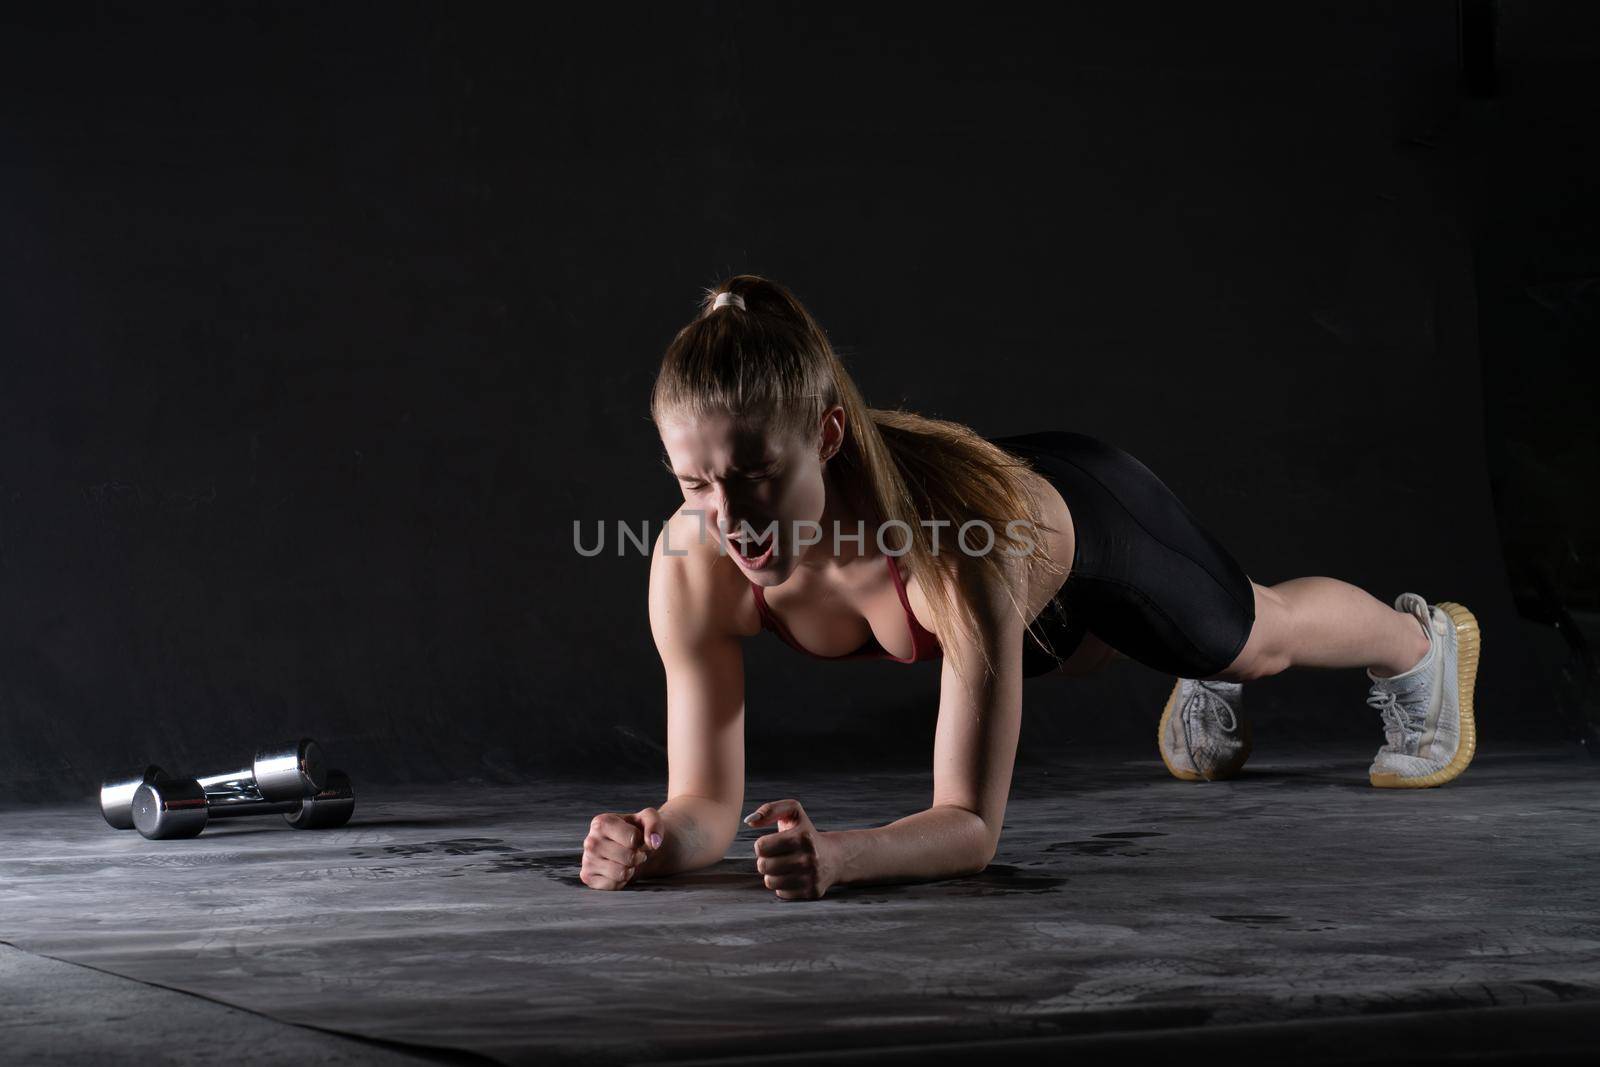 A with dumbbells the on in stands girl the plank floor push-ups looks like a kira knightley girl plank sports, for gym health from person for sport bodybuilding, strength sexy. Wellness ABS model